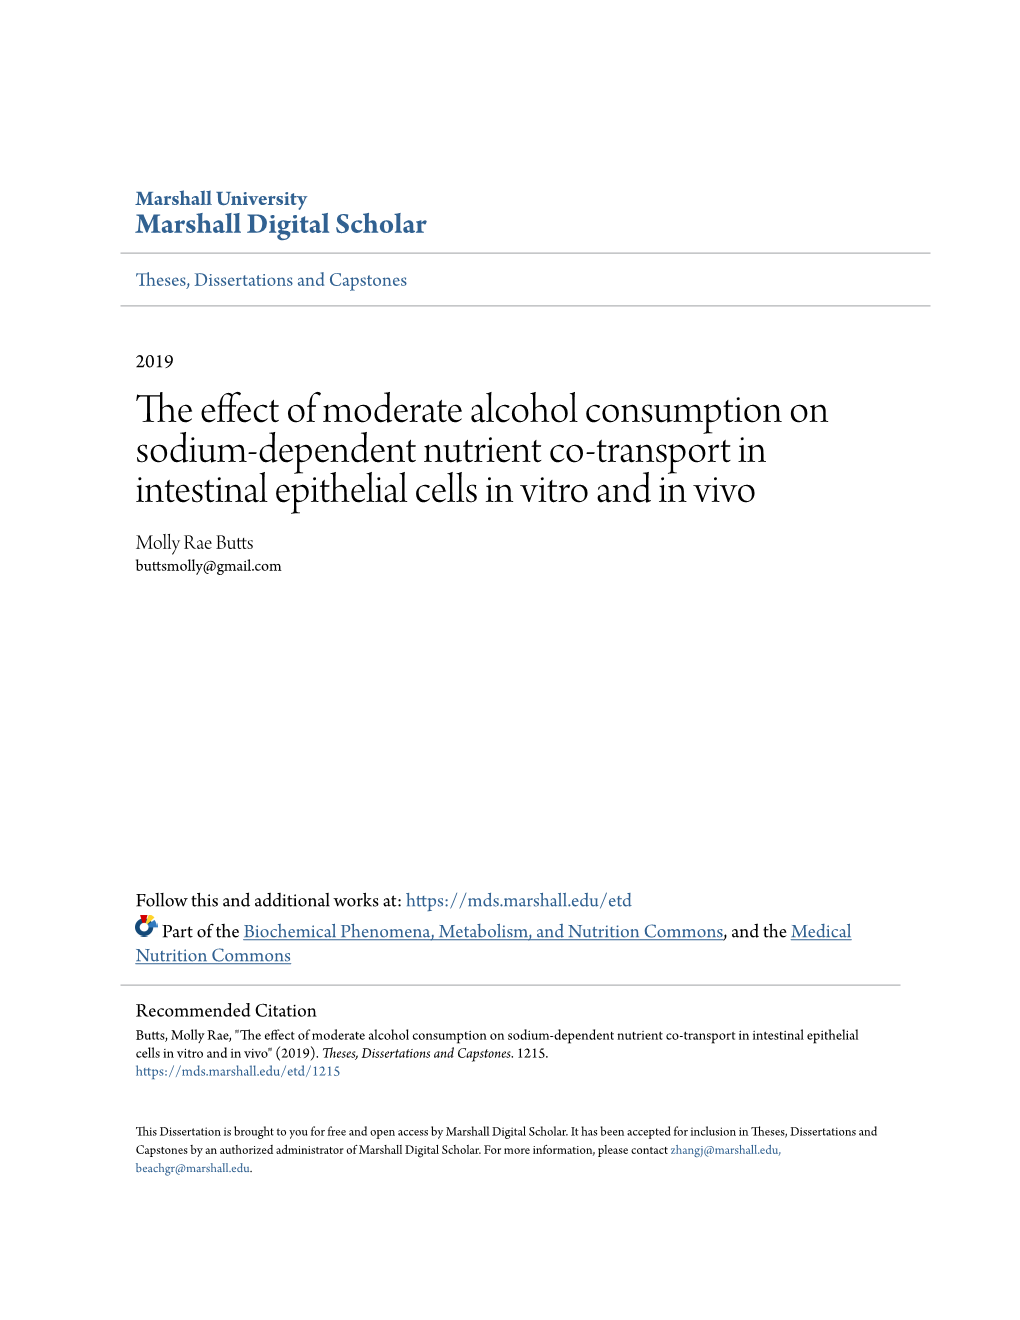 The Effect of Moderate Alcohol Consumption on Sodium-Dependent